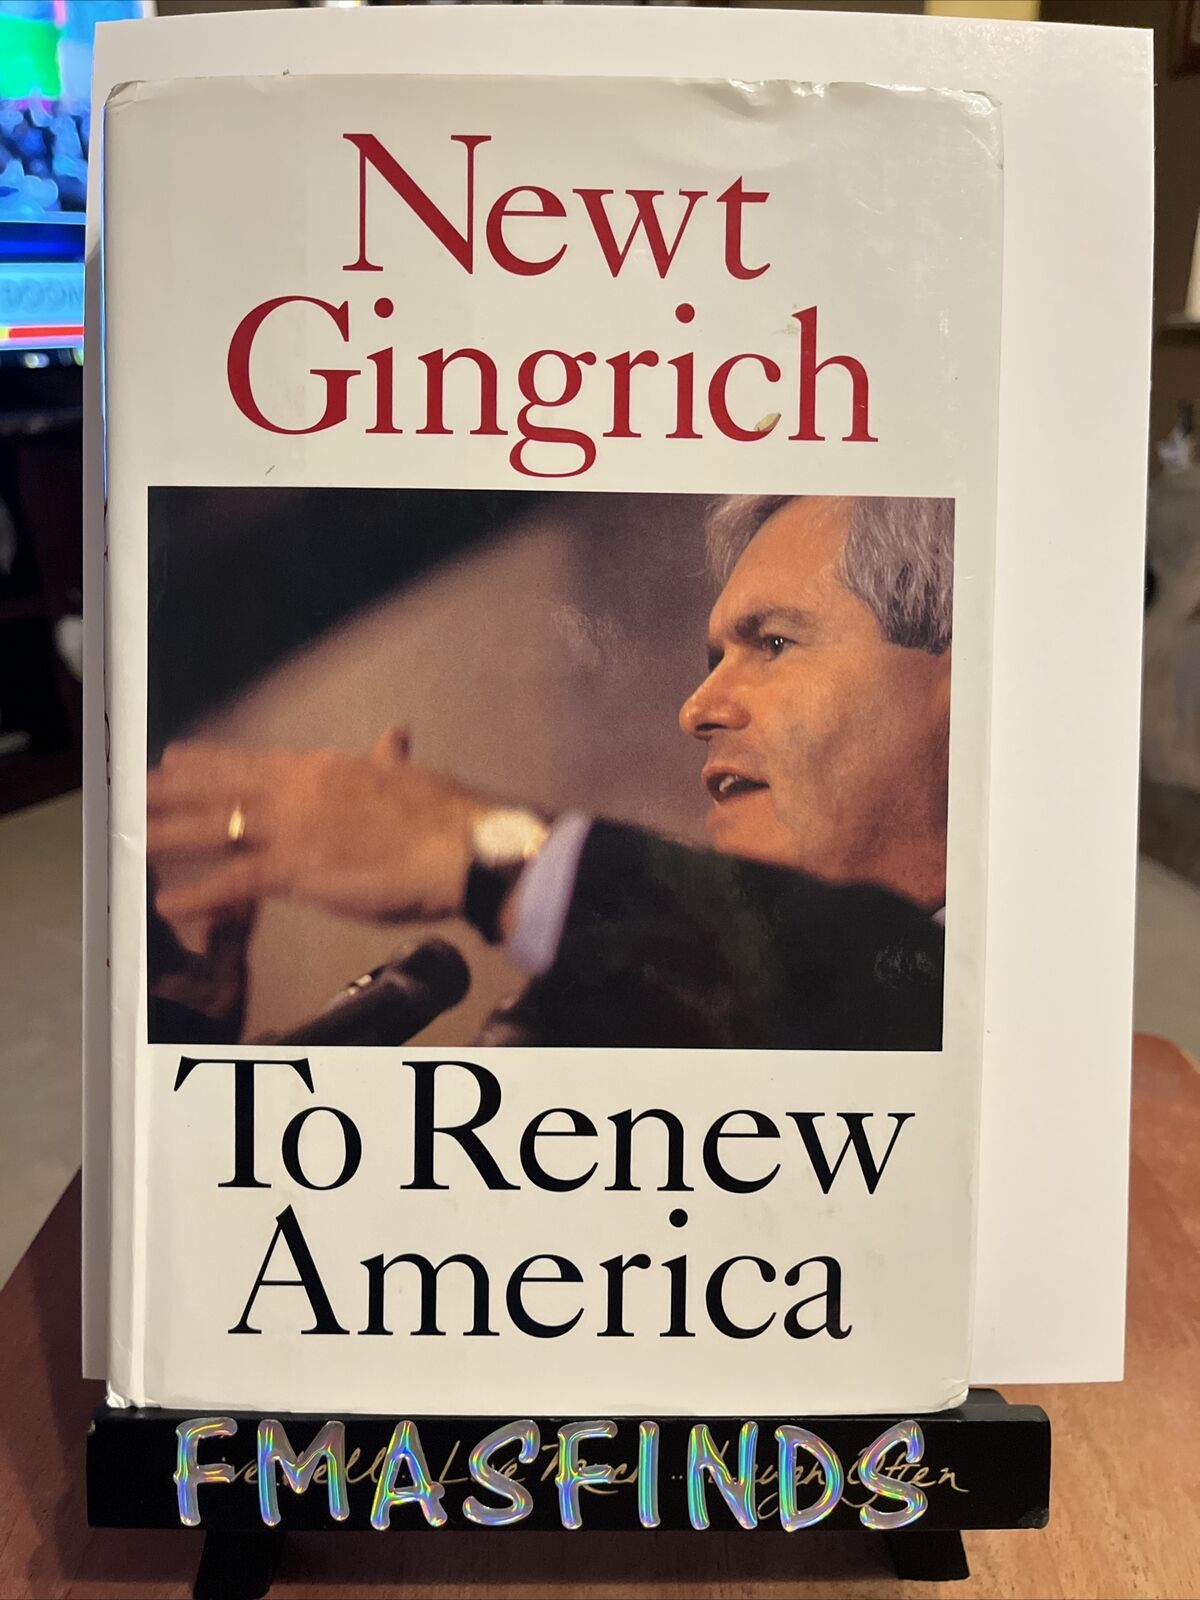 NEWT GINGRICH Signed Book To Renew America GEORGIA FORMER SPEAKER OF THE HOUSE